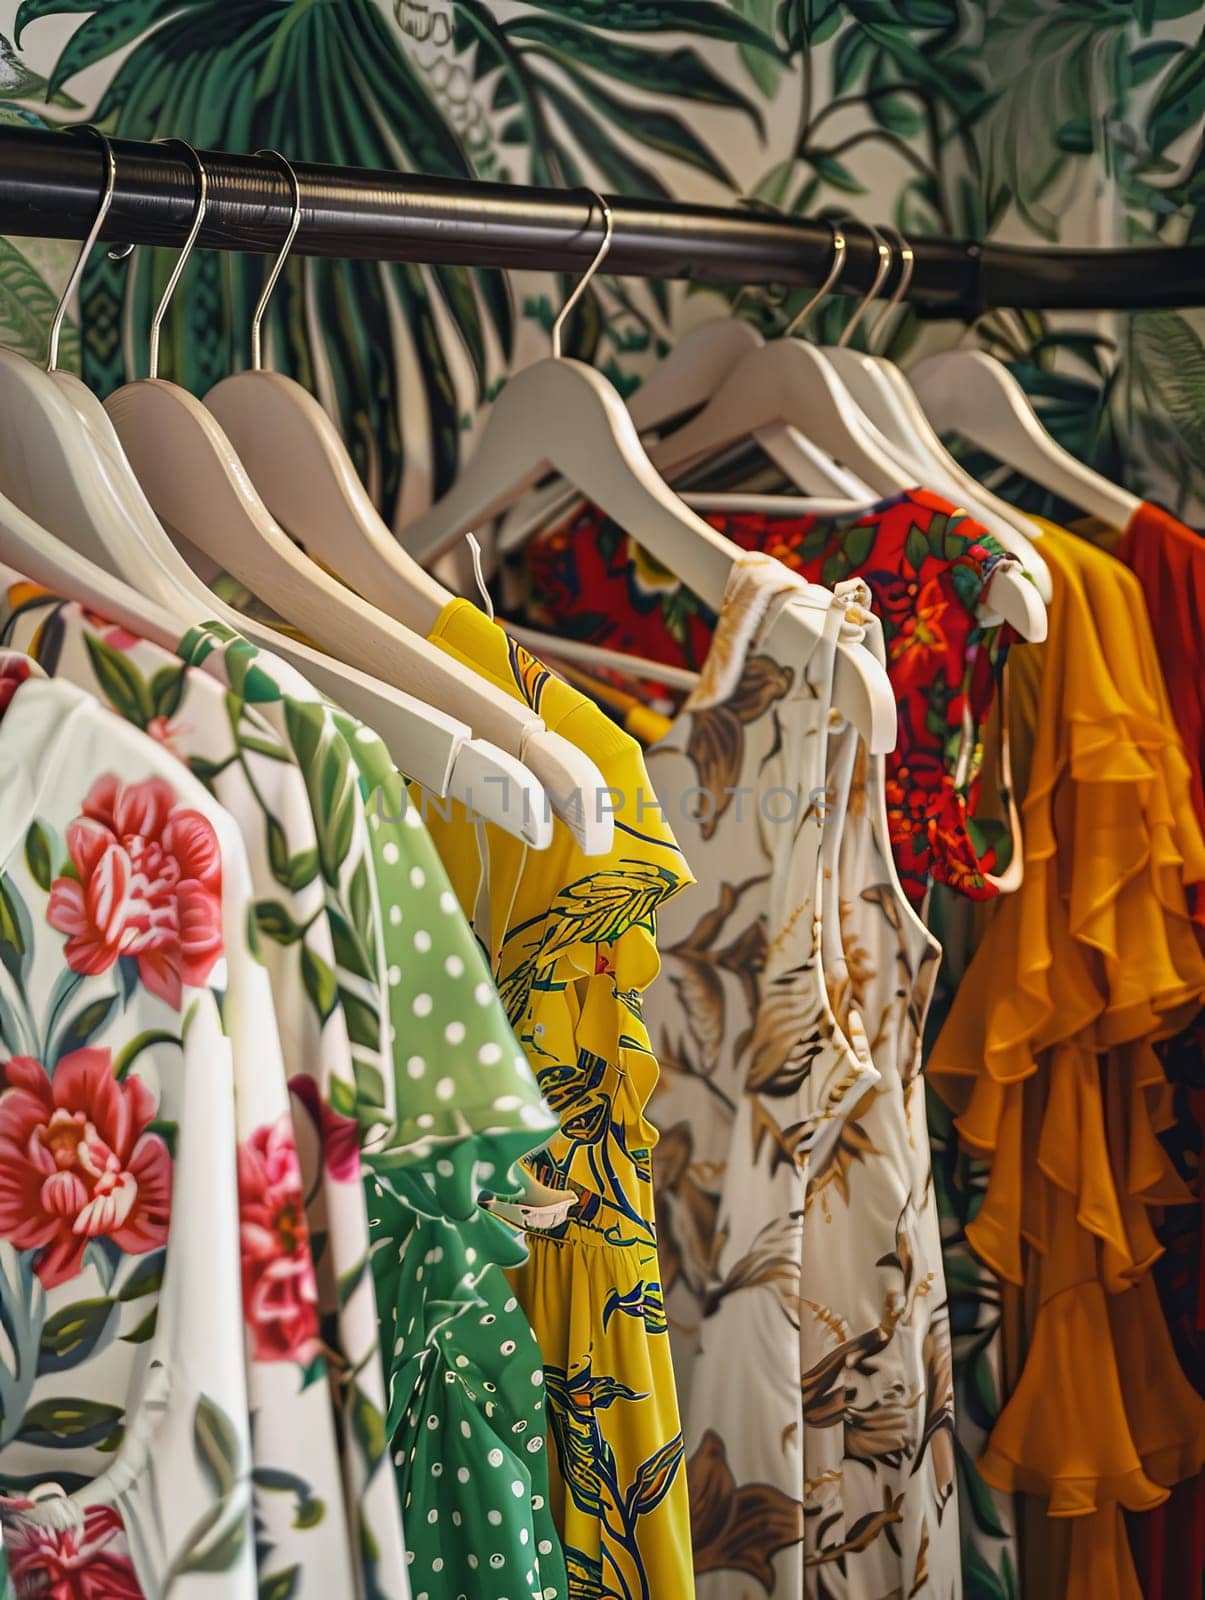 Colorful dresses and shirts hanging on display in a fashionable womens closet showroom.